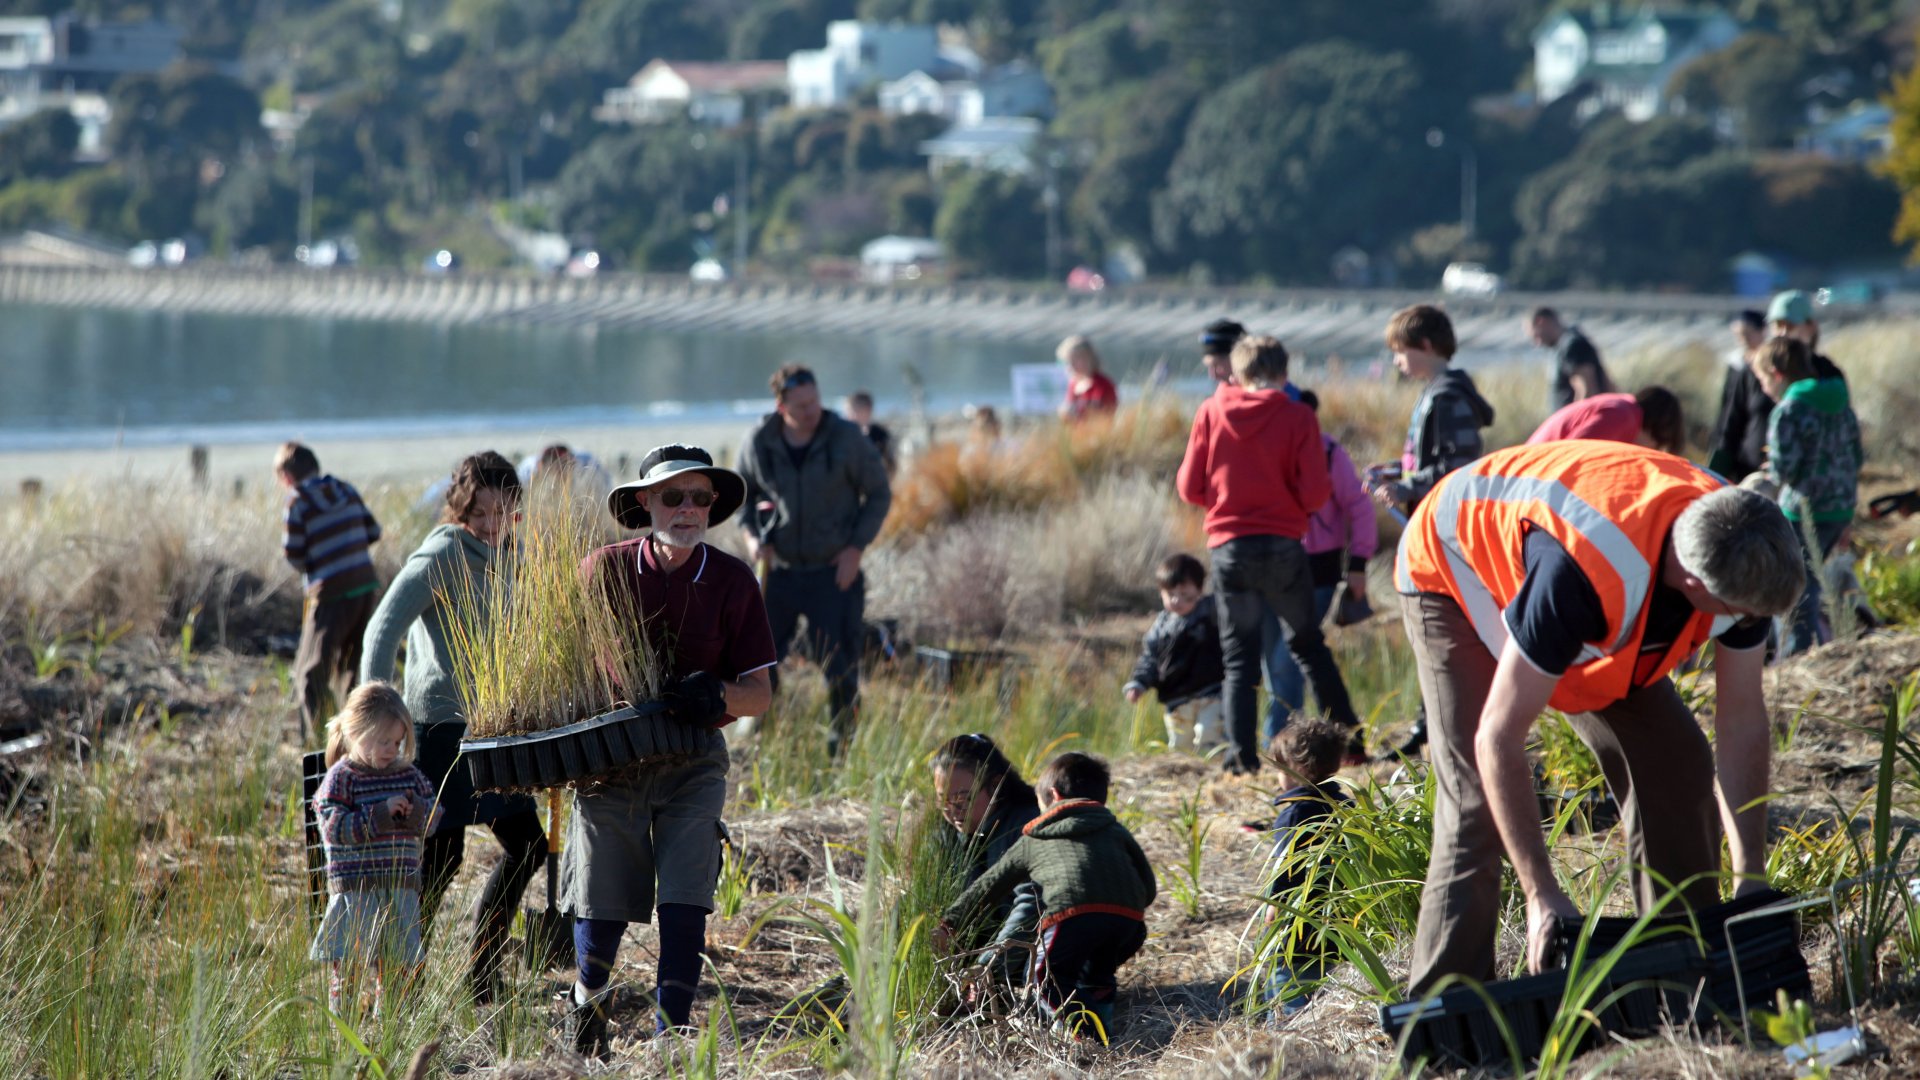 The Tahunanui Dune Restoration community planting is scheduled to take place on Arbor Day, 5 June 2021.